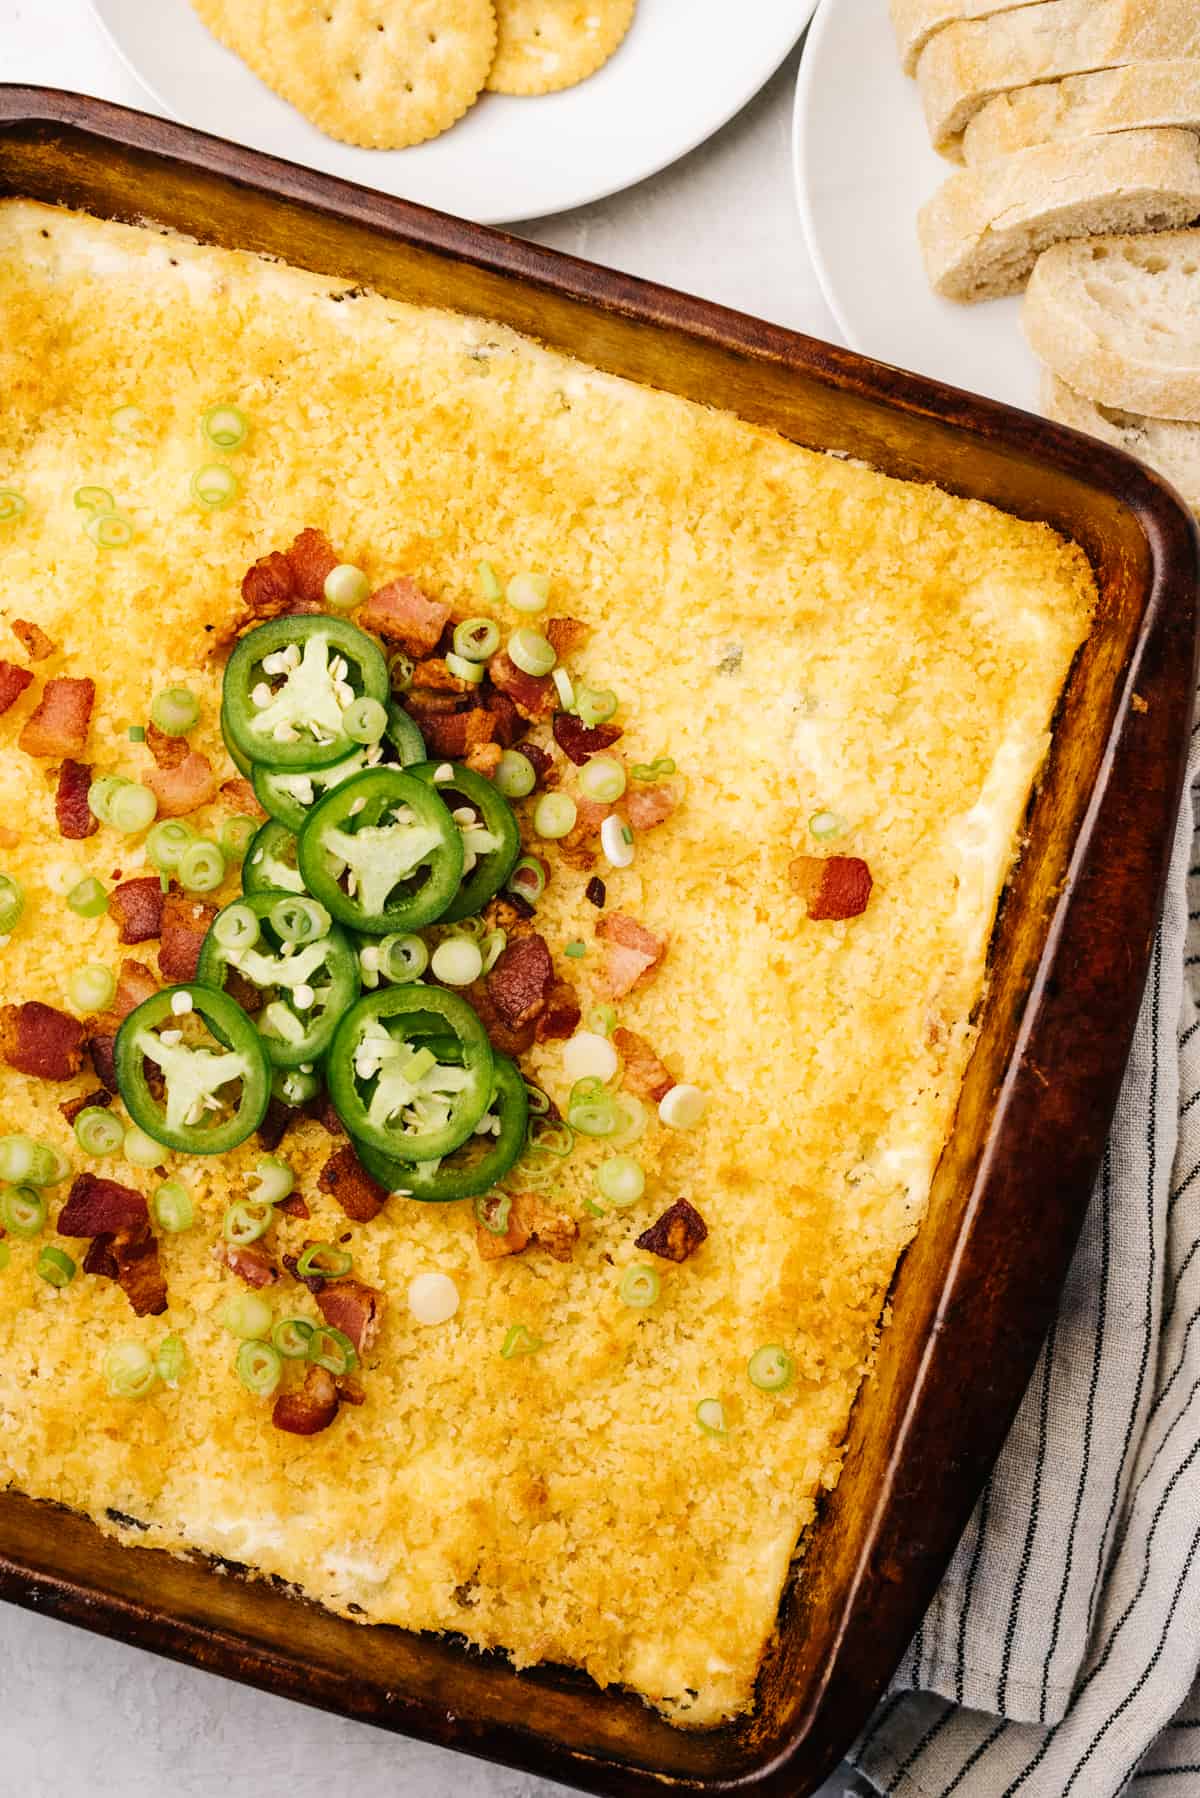 Jalapeno popper dip in a casserole dish, surrounded by Ritz crackers and sliced bread.